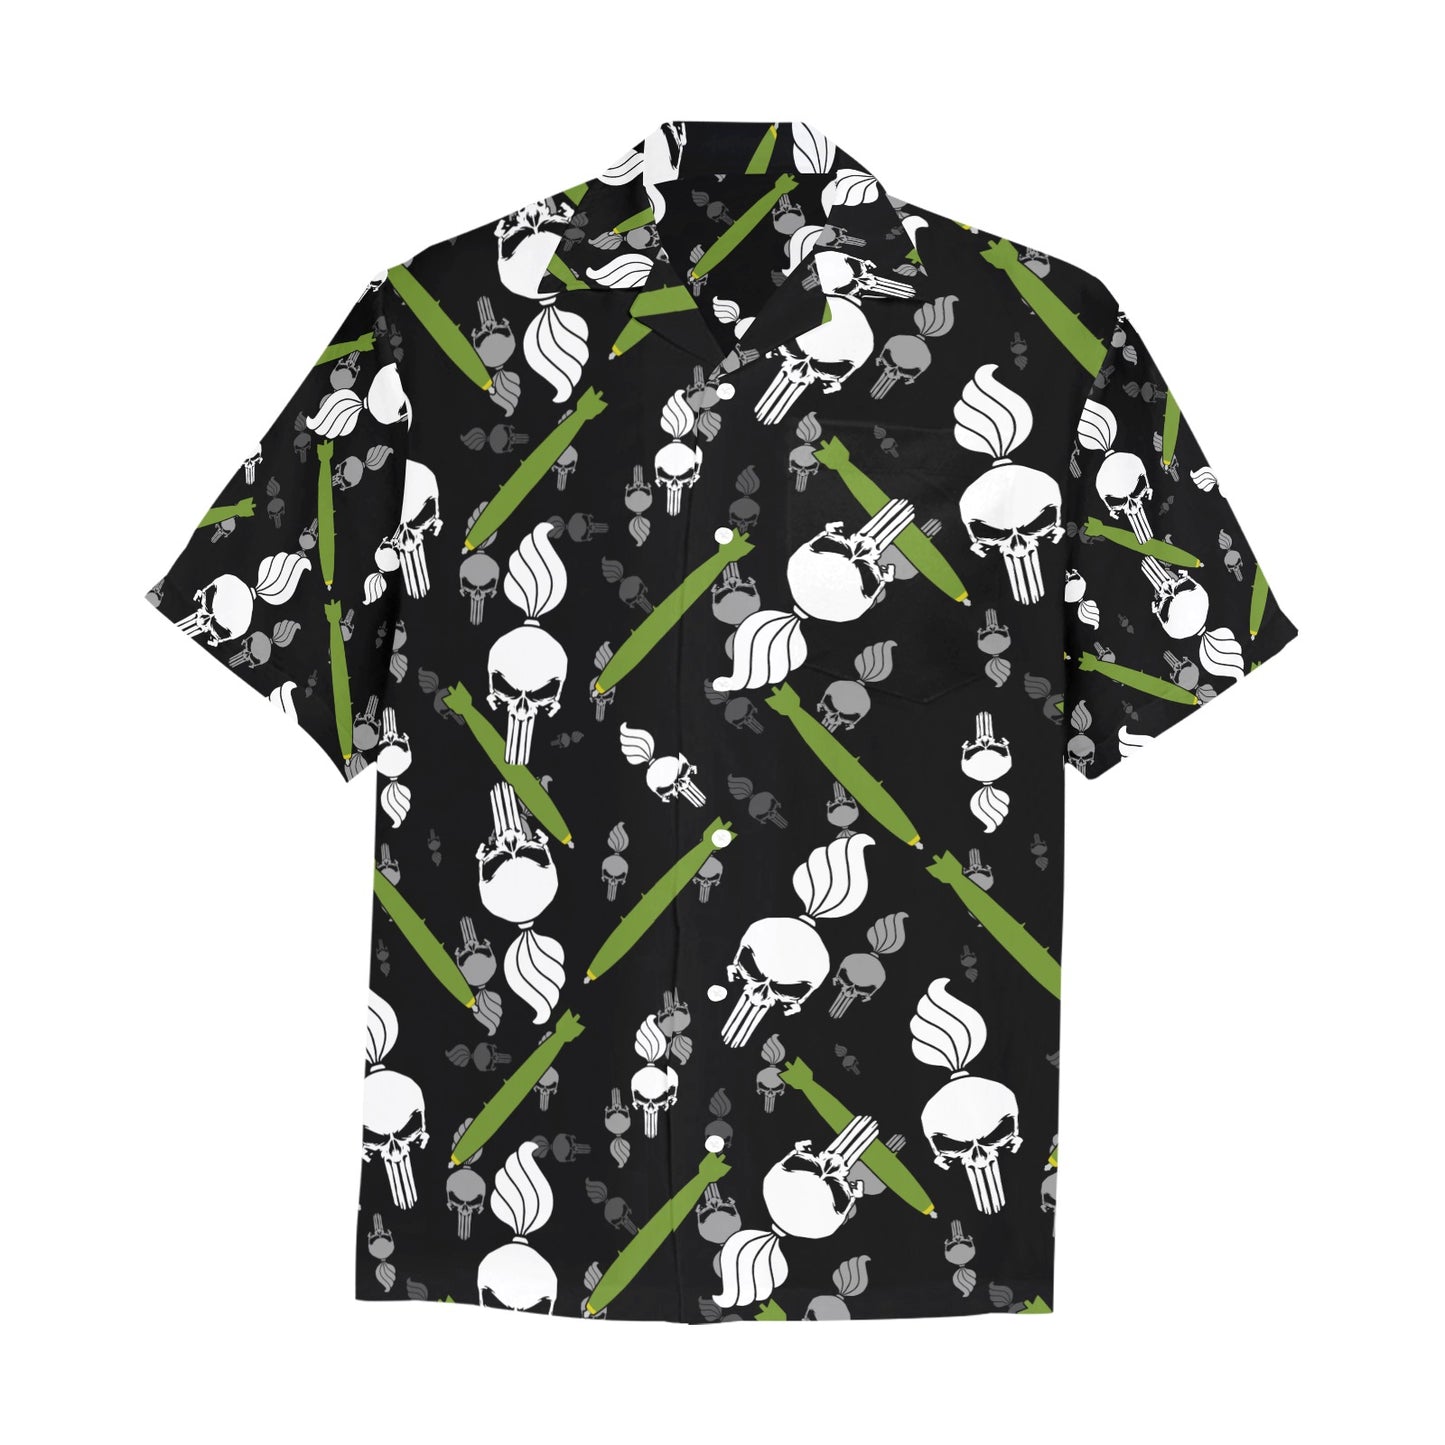 Punisher Skull Pisspots and Bombs Front Left Chest Pocket Hawaiian Shirt